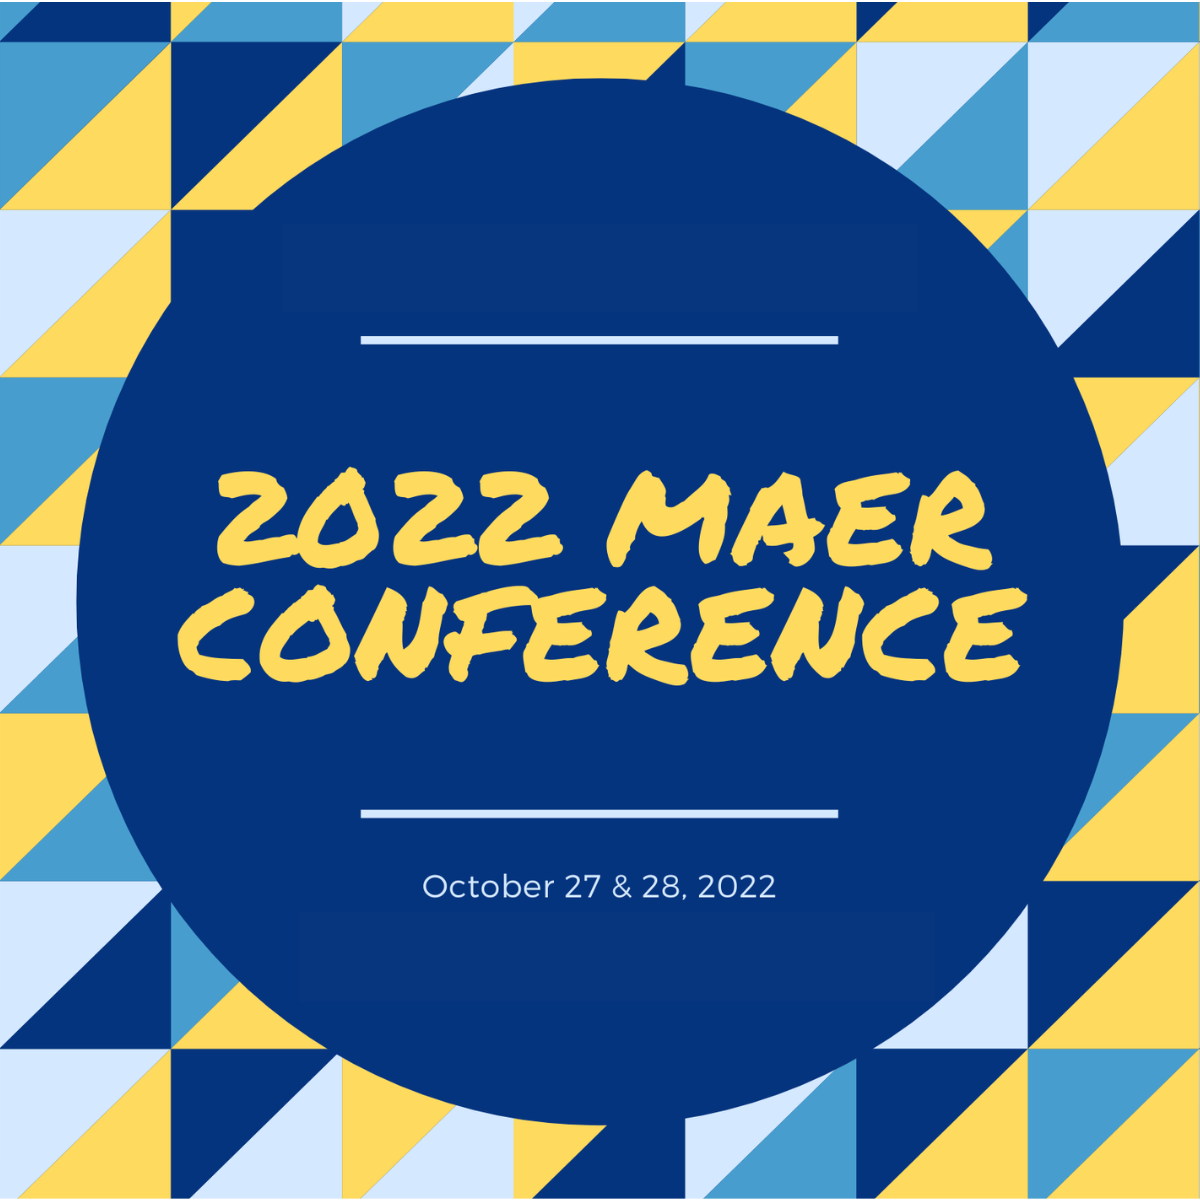 NRTC Presents at 2022 MAER Conference The National Research and